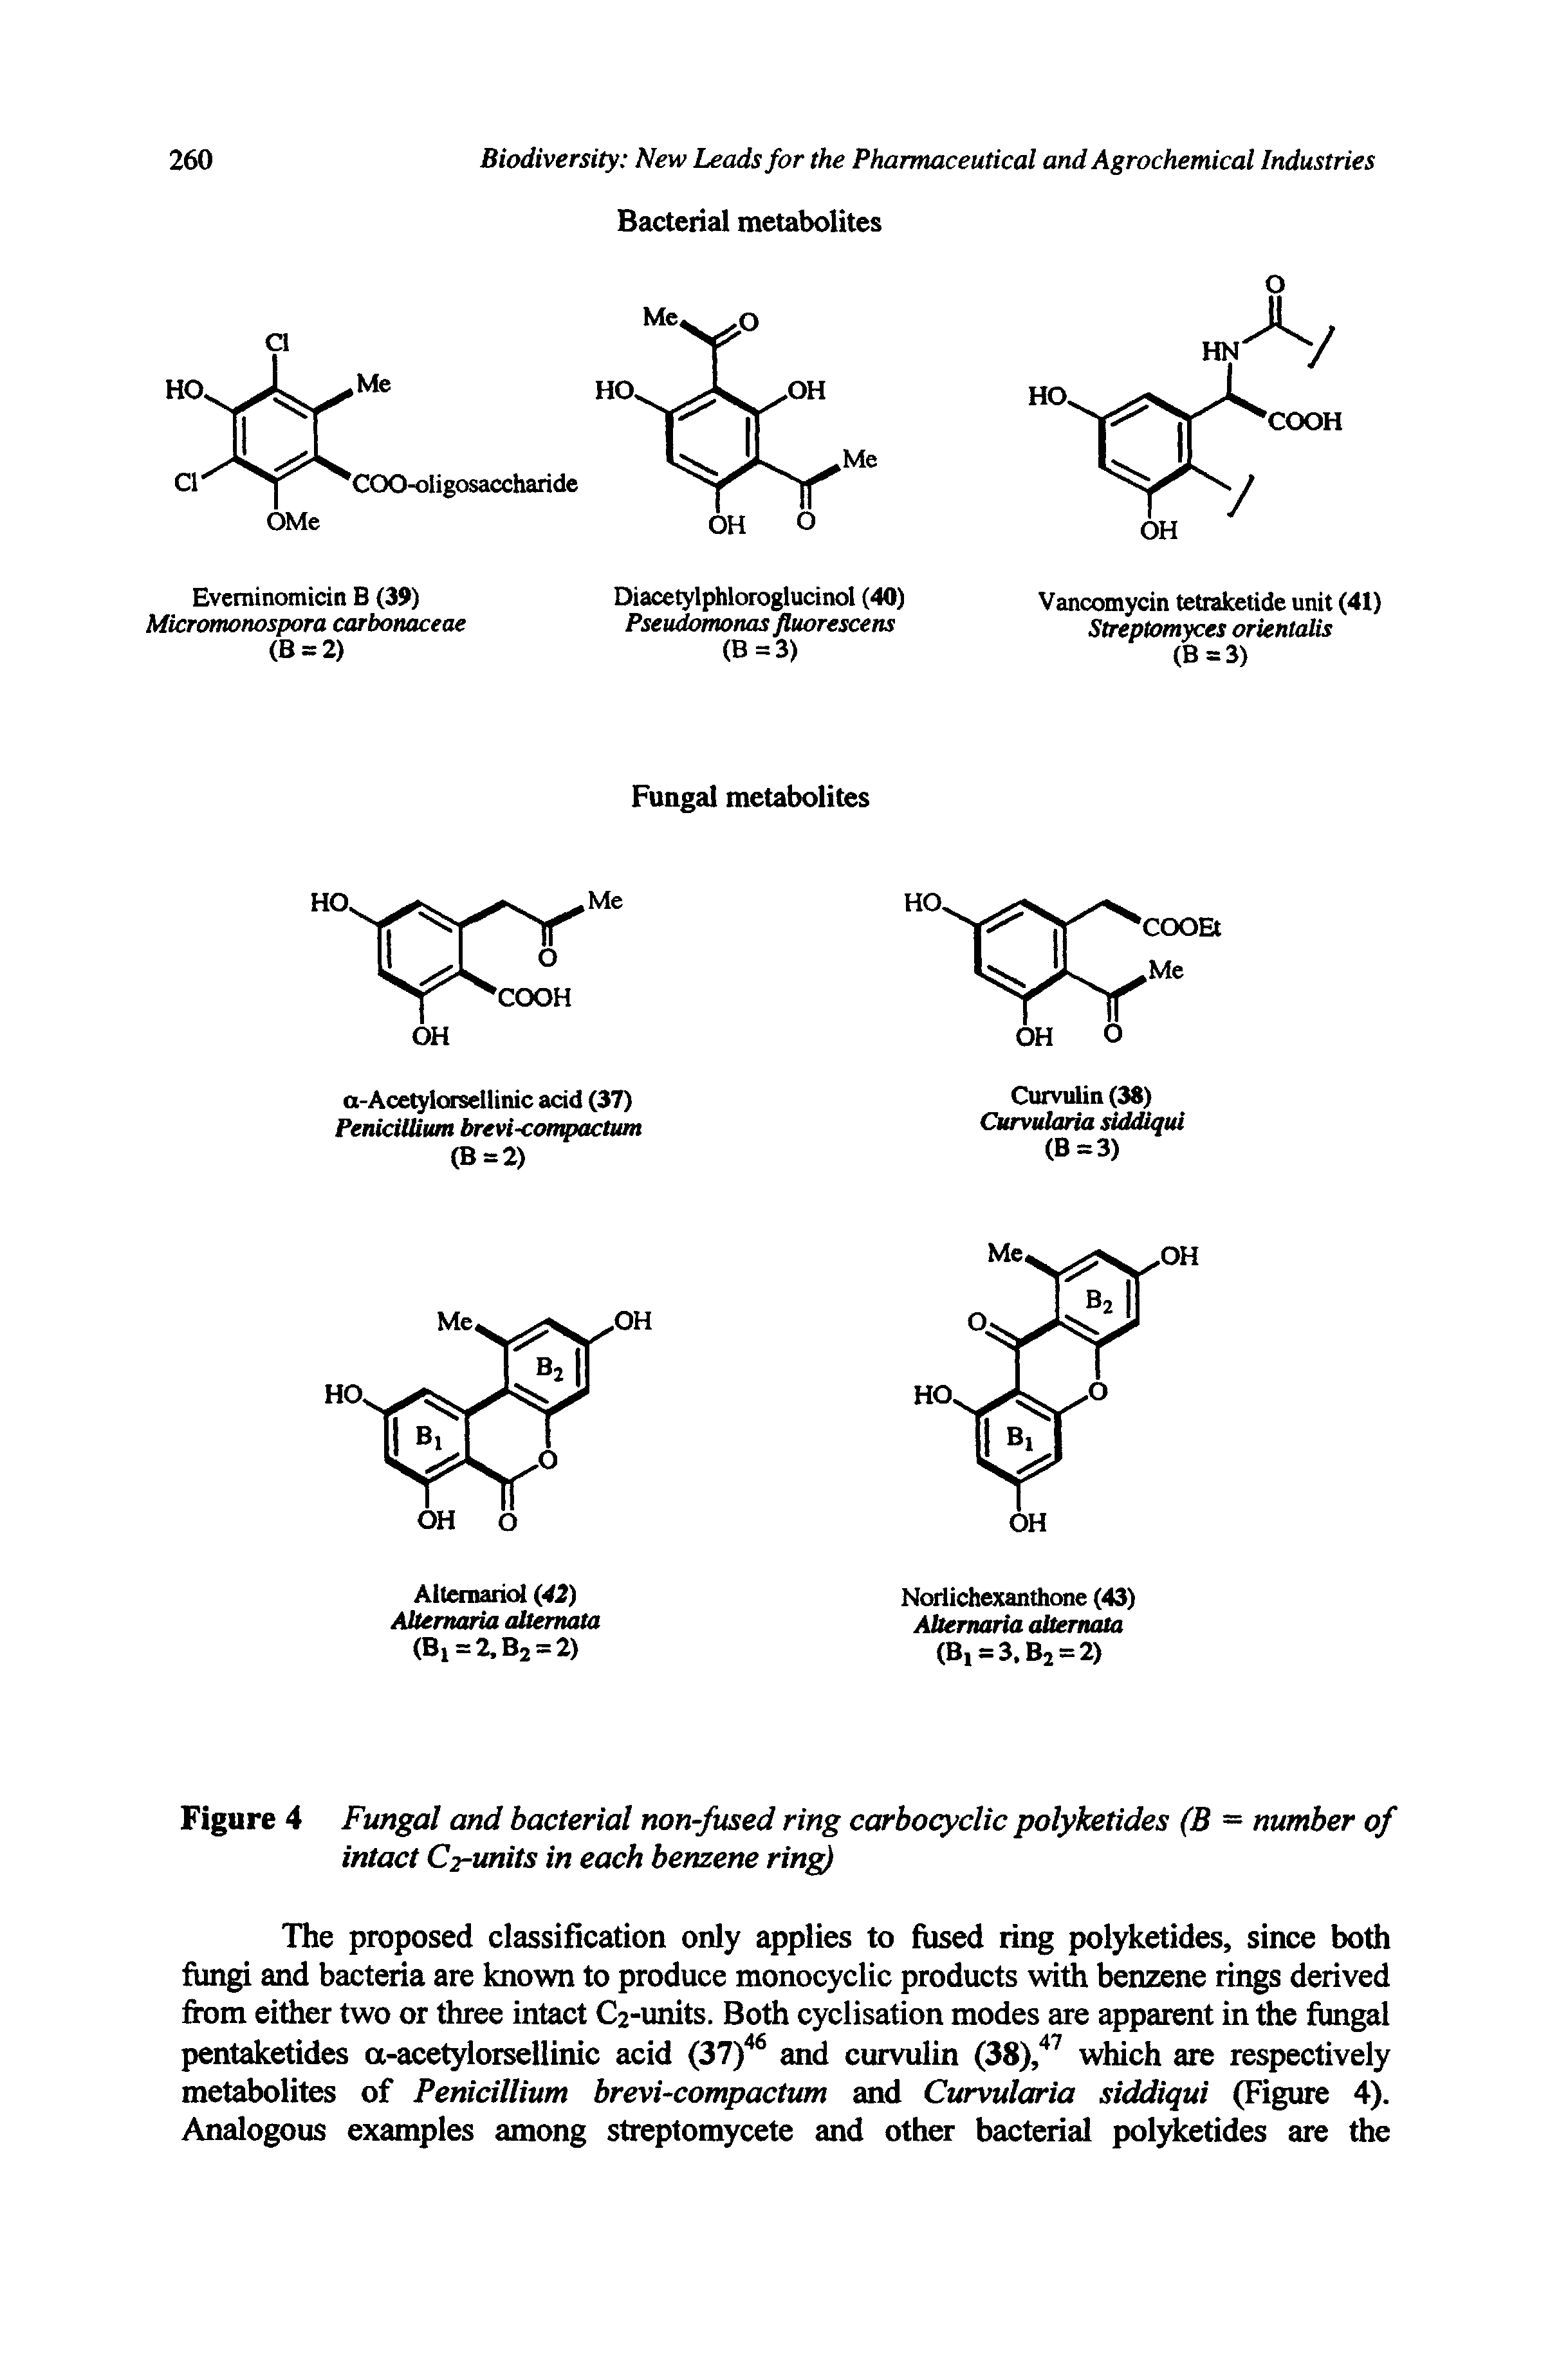 Figure 4 Fungal and bacterial non-fused ring carbocyclic polyketides (B = number of intact C2-units in each benzene ring)...